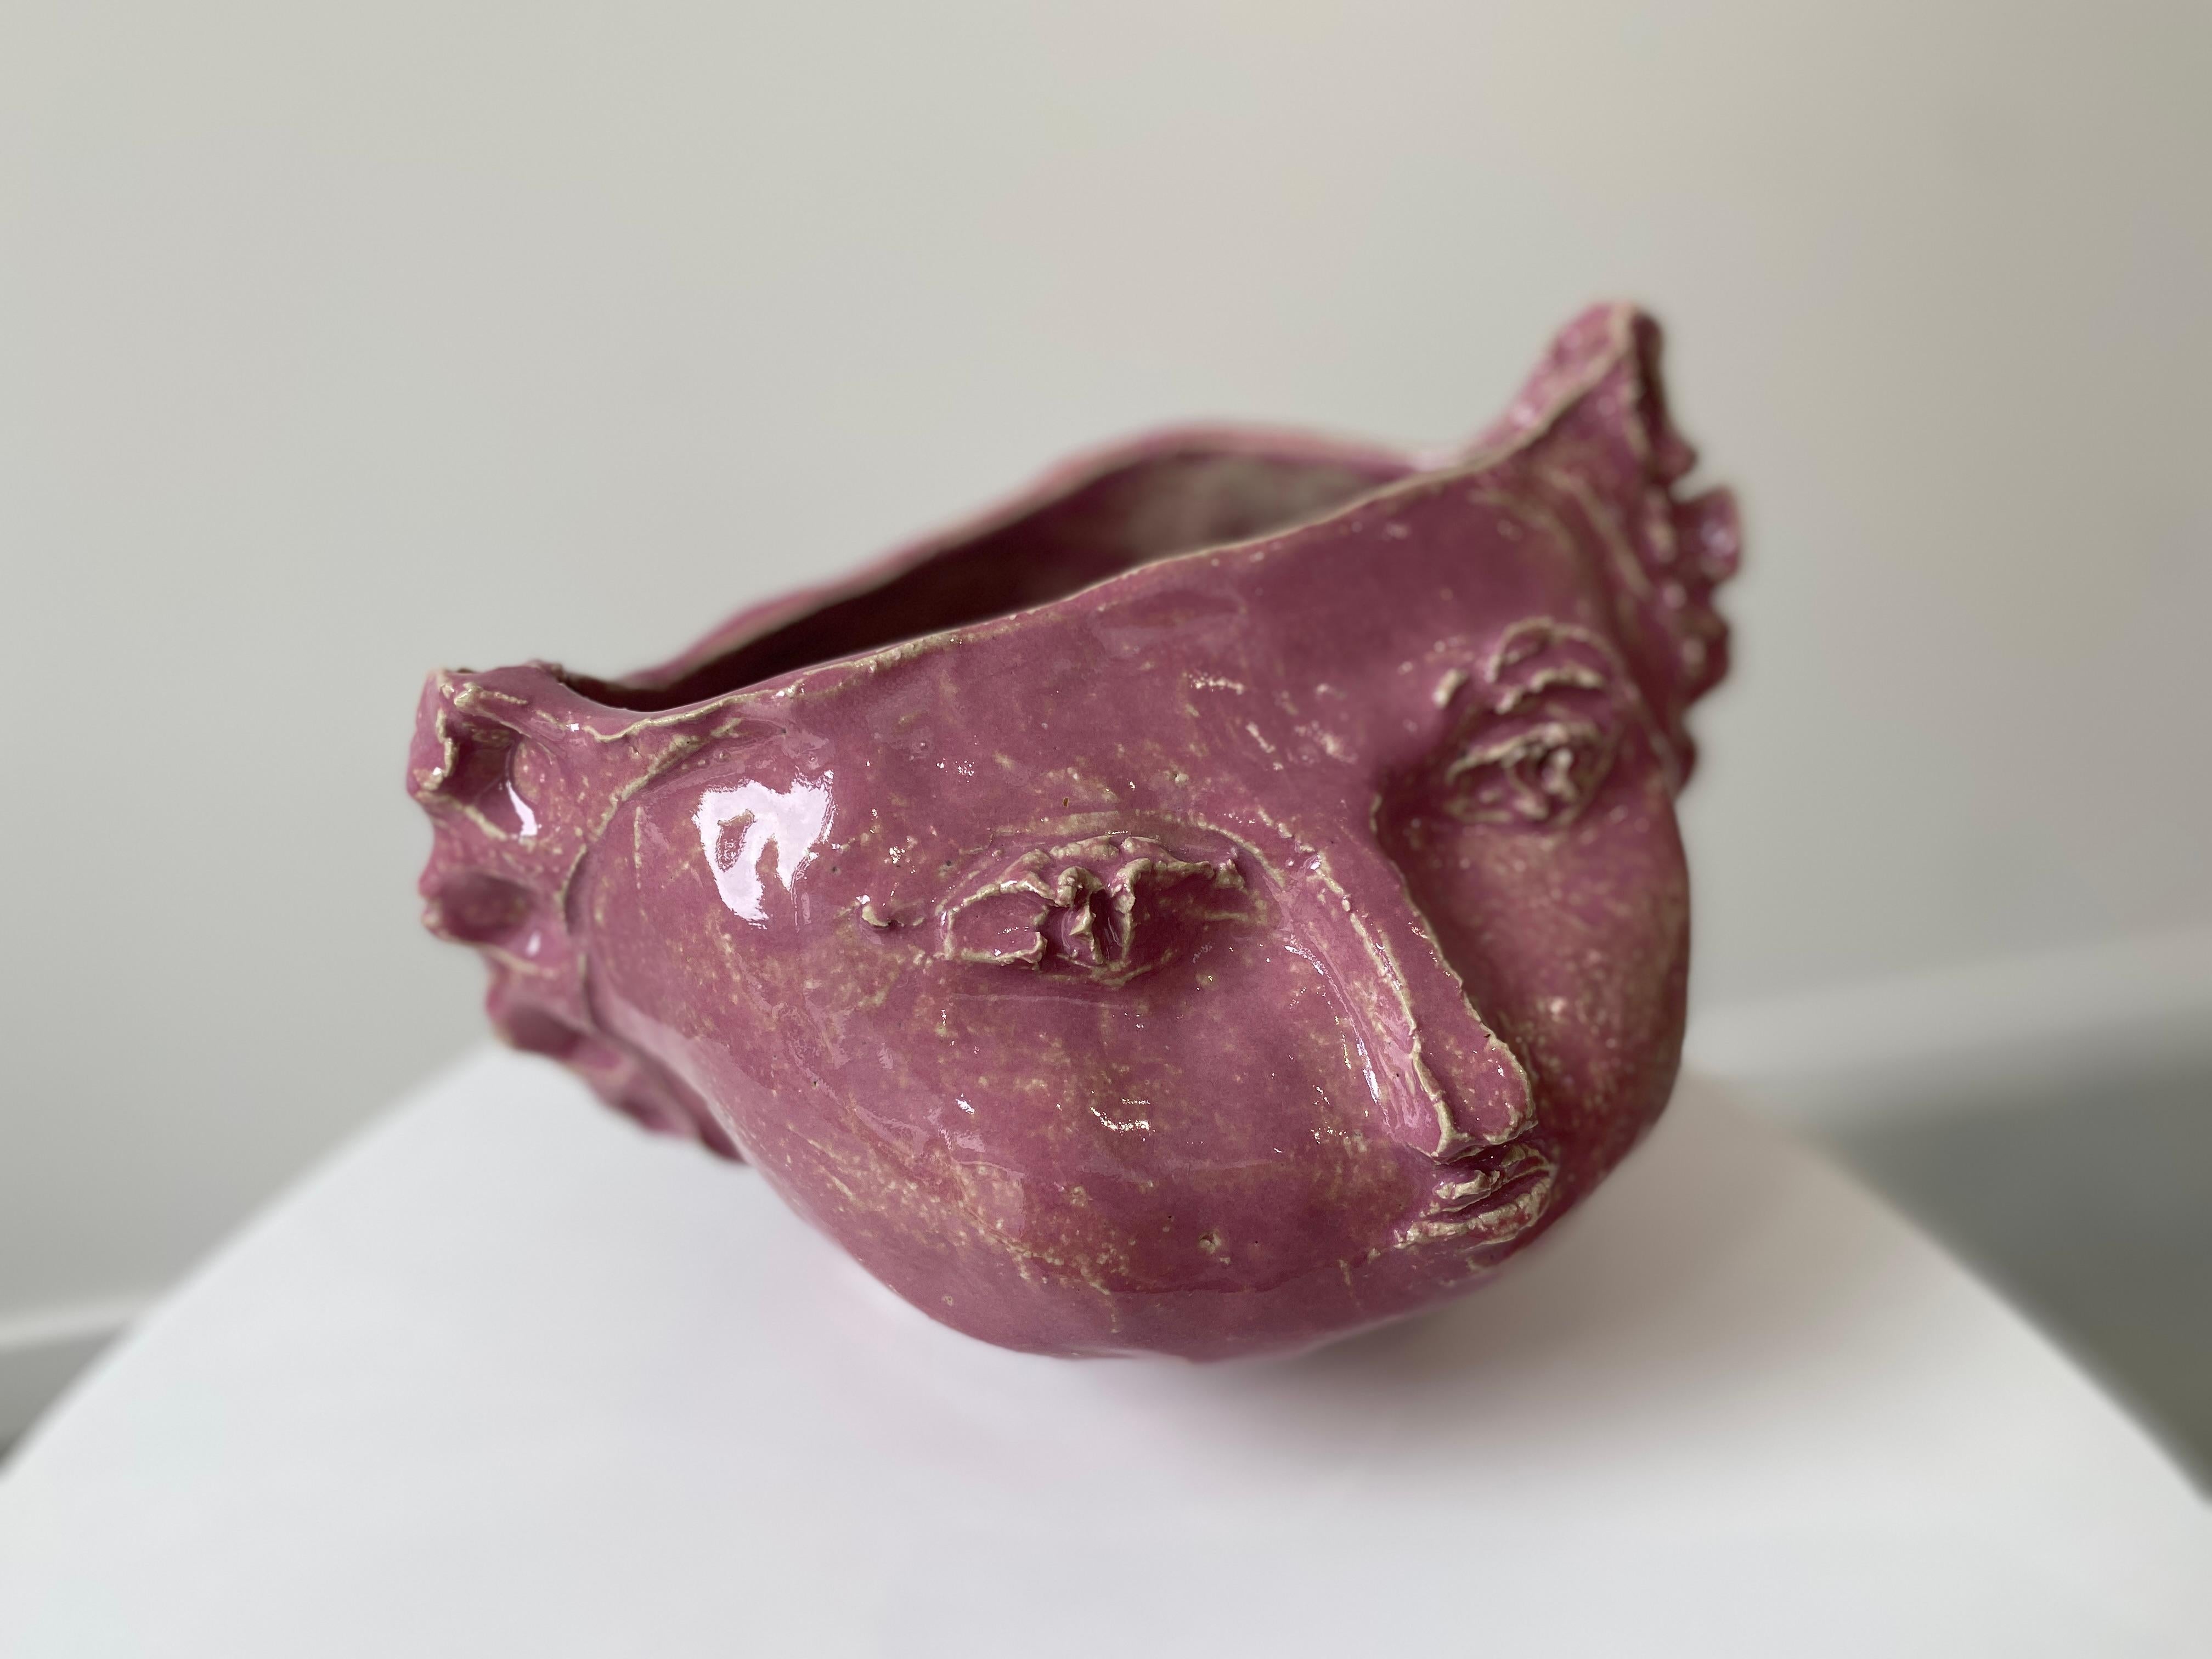 Pink sweet girl rustic wabi sabi hand sculpted glazed clay head face vessel vase For Sale 12